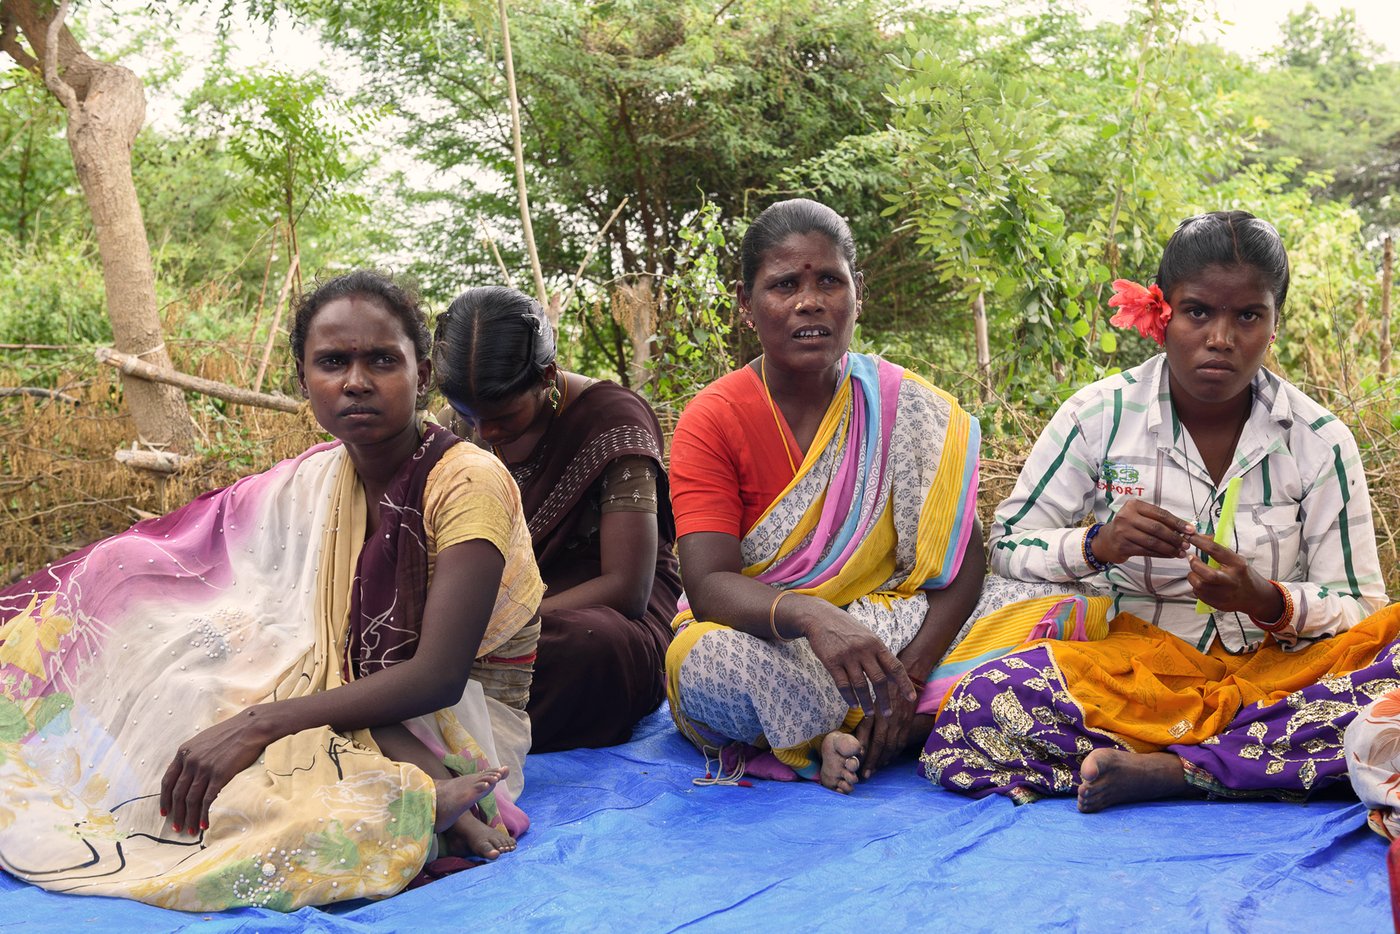 Irula women of Bangalamedu hamlet in TN's Thiruvallur district are very dependent on the MGNREGA. But fewer days of work, delayed payments and an alienating digitisation process cause them huge problems

